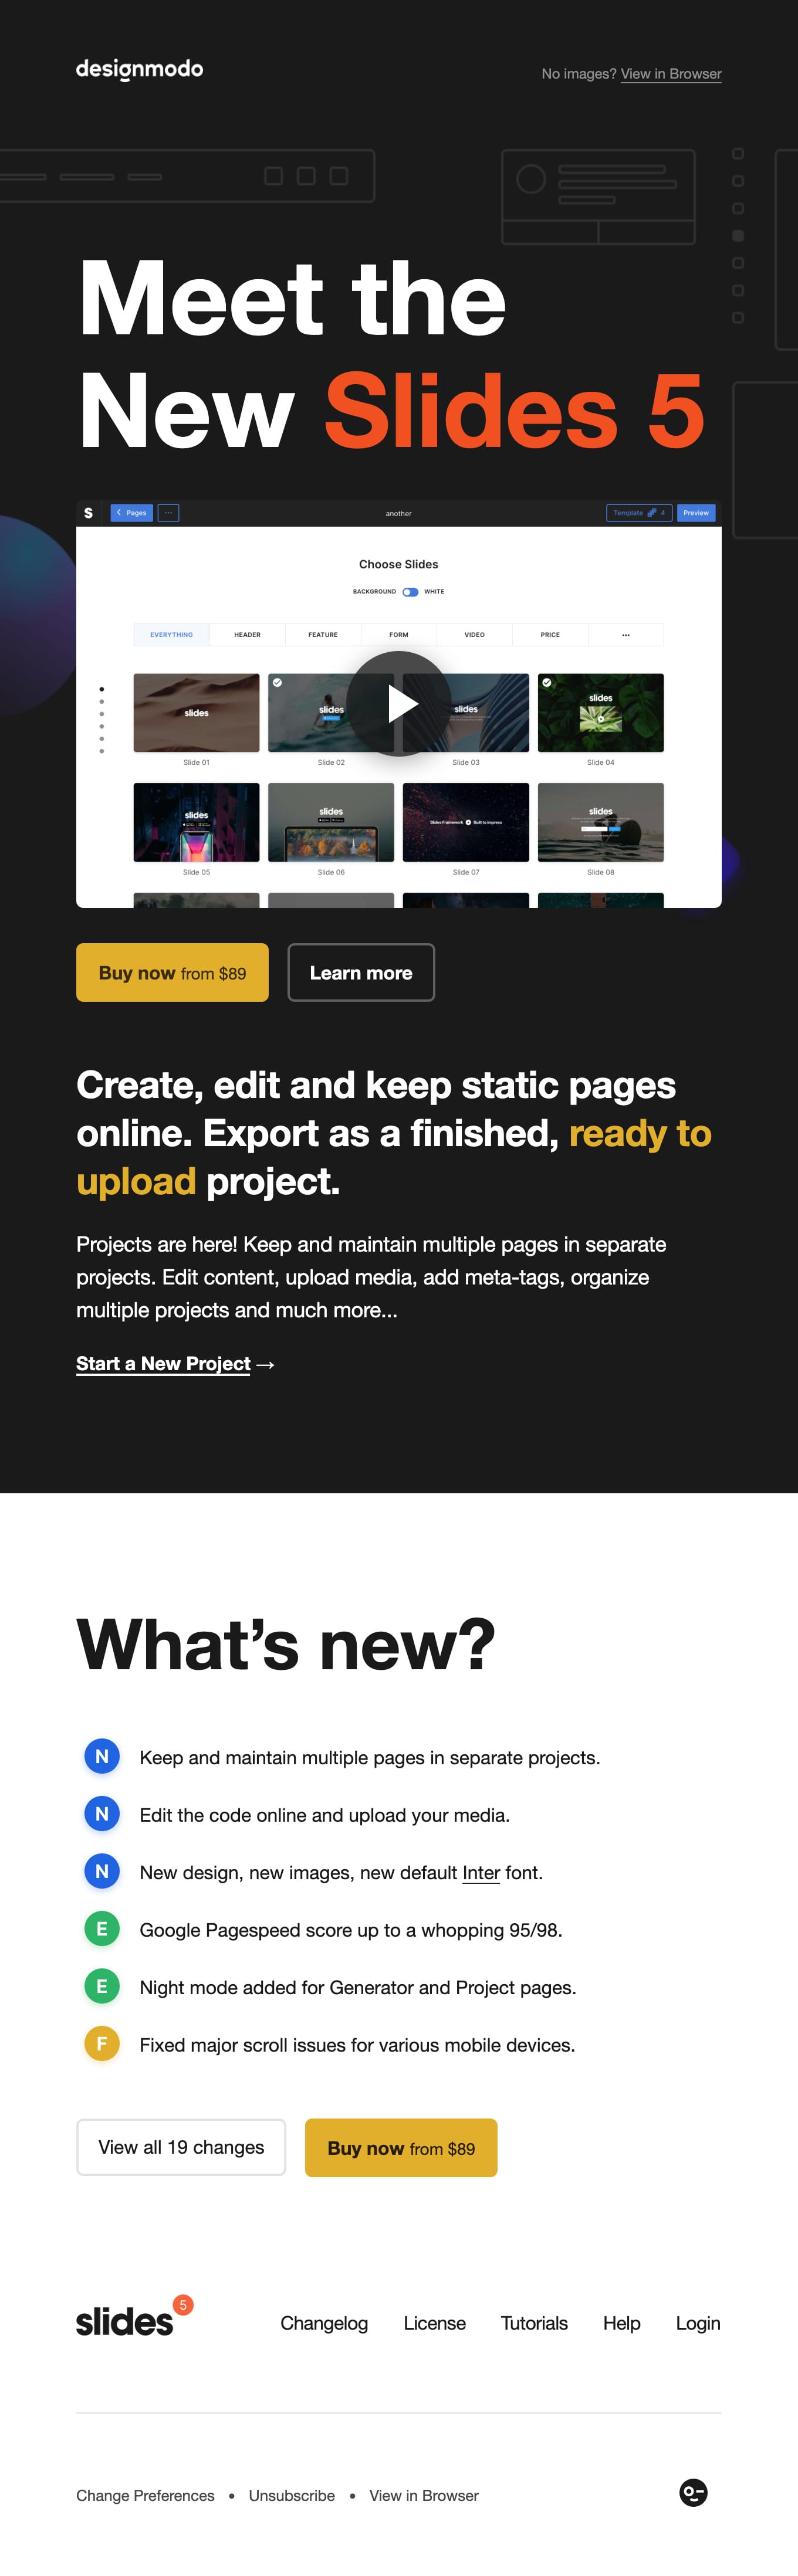 Slides 5 is Here! Create projects, edit the code online.. Email Screenshot